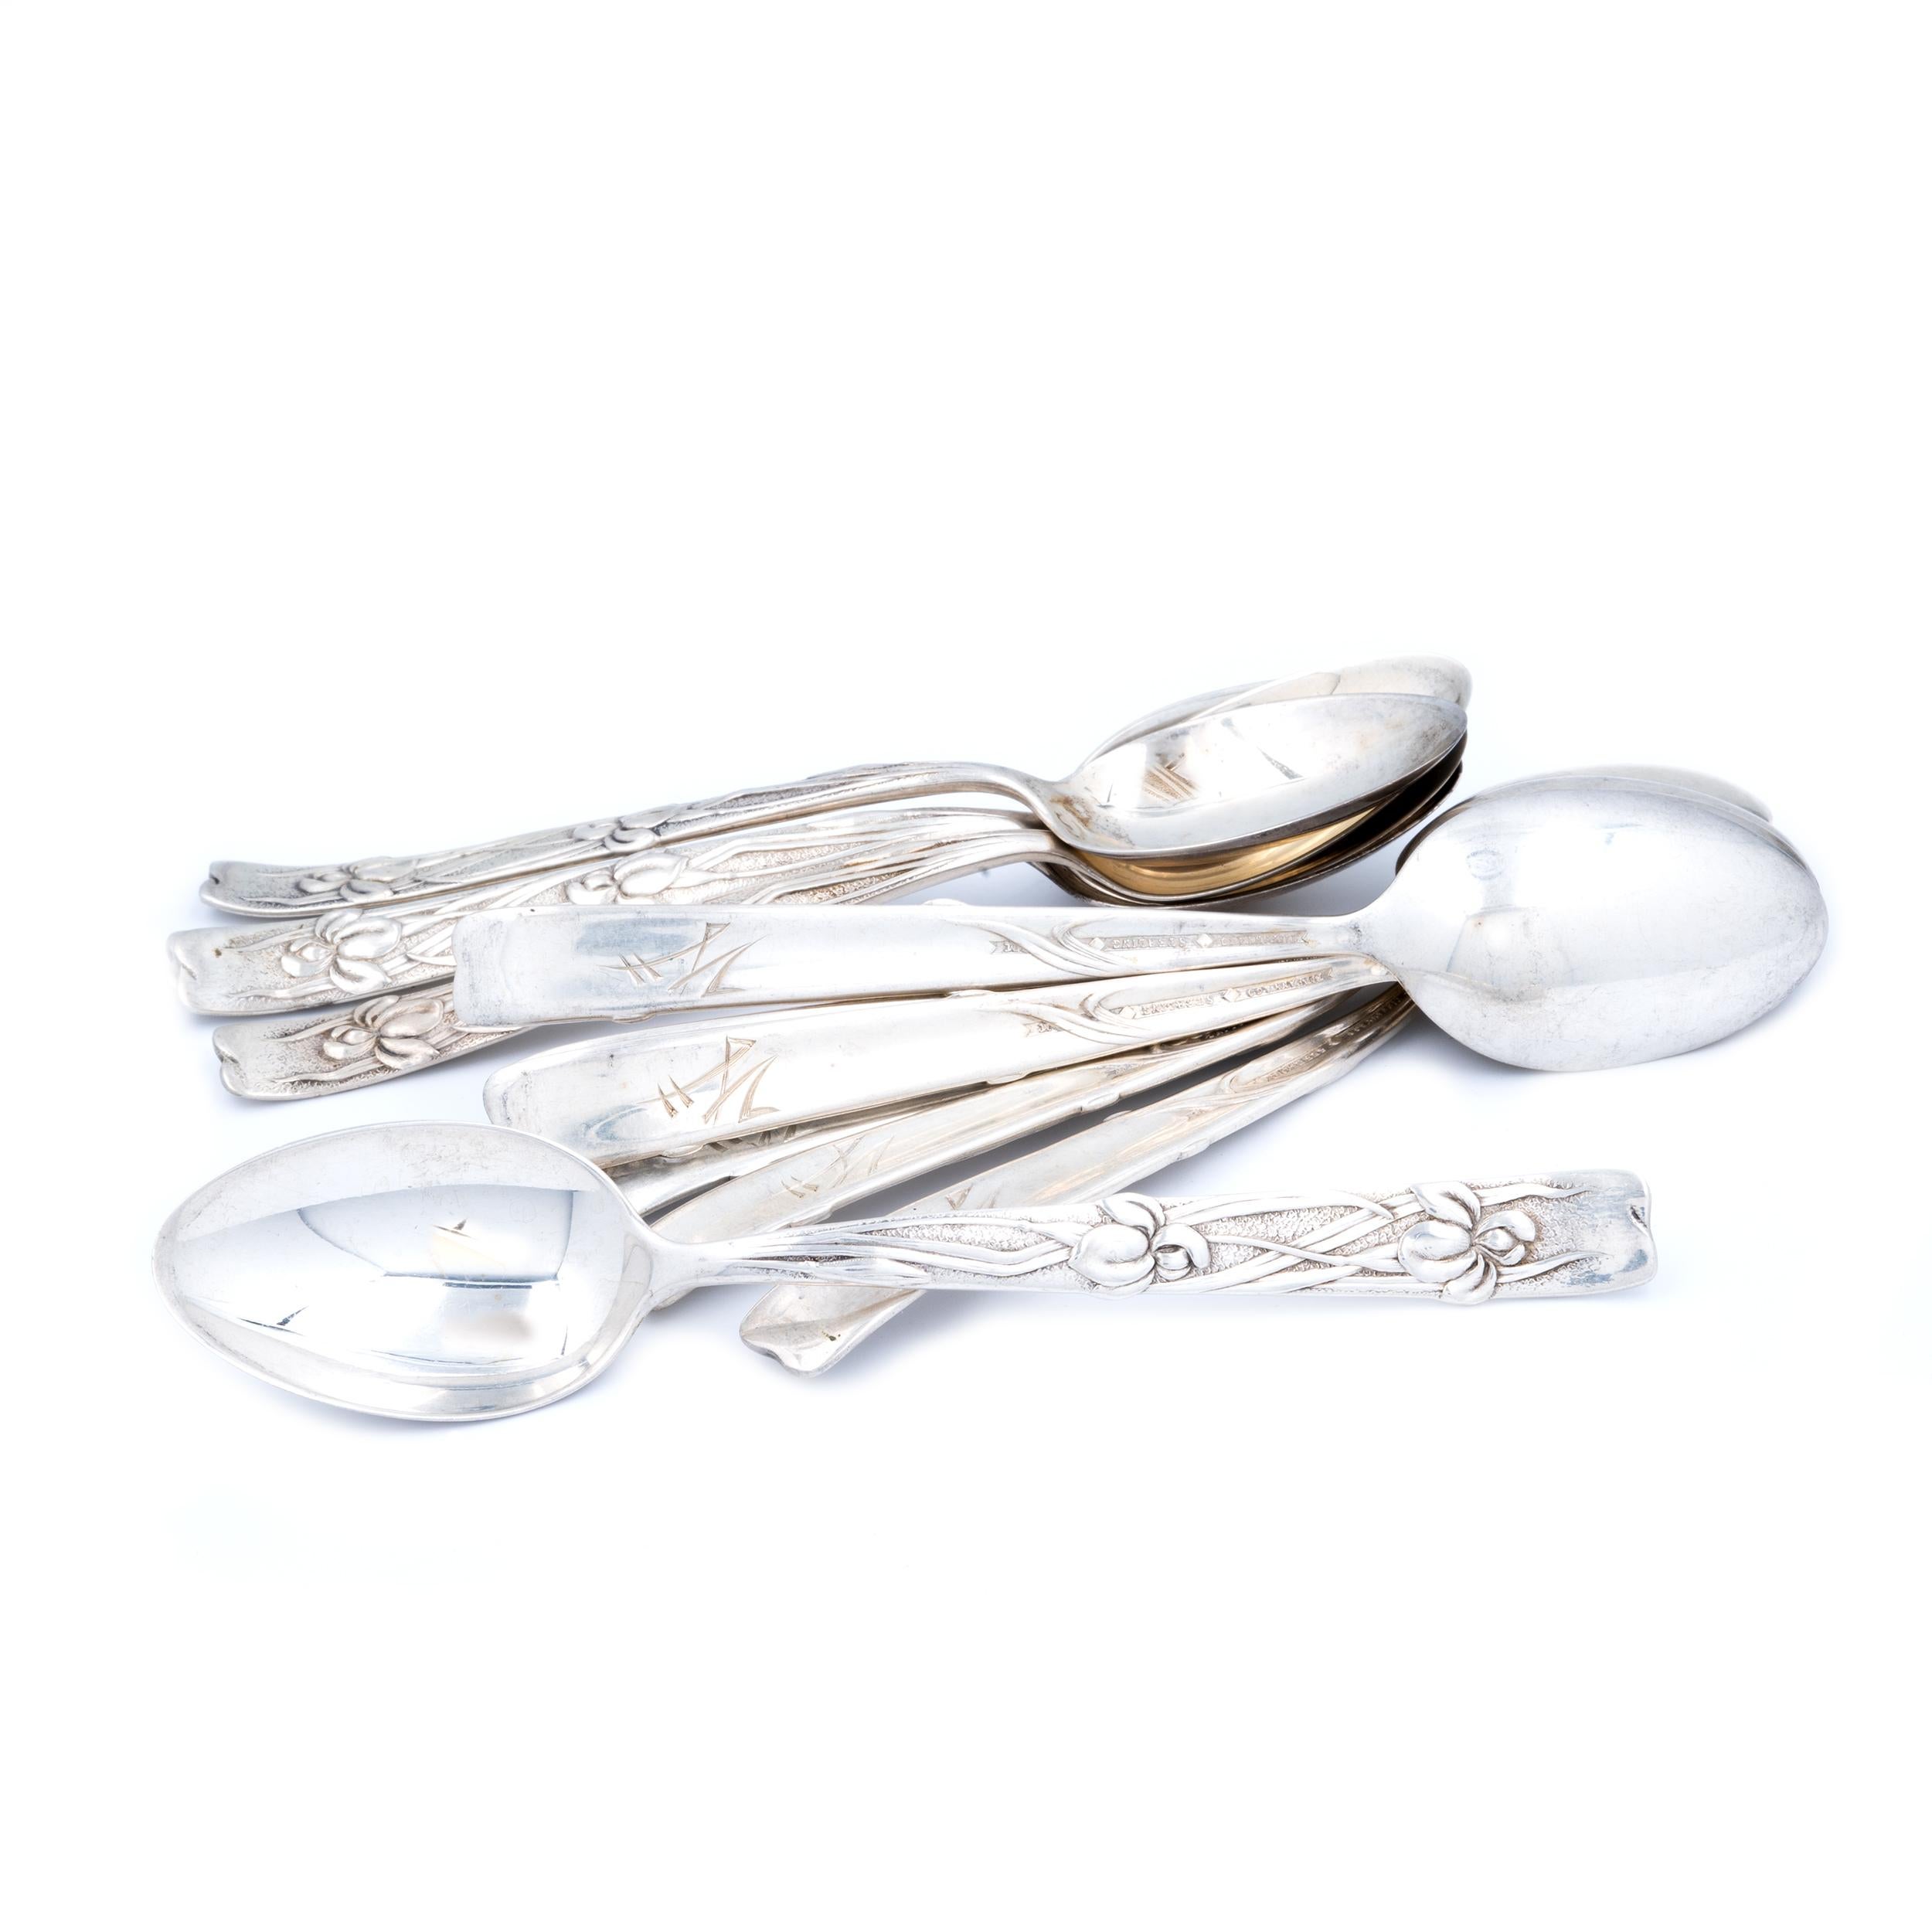 Designer: Tiffany & Co. 
Material: sterling silver
Dimensions: demitasse spoons measure 4.75 X 1-inch
Weight: SET 190 grams
